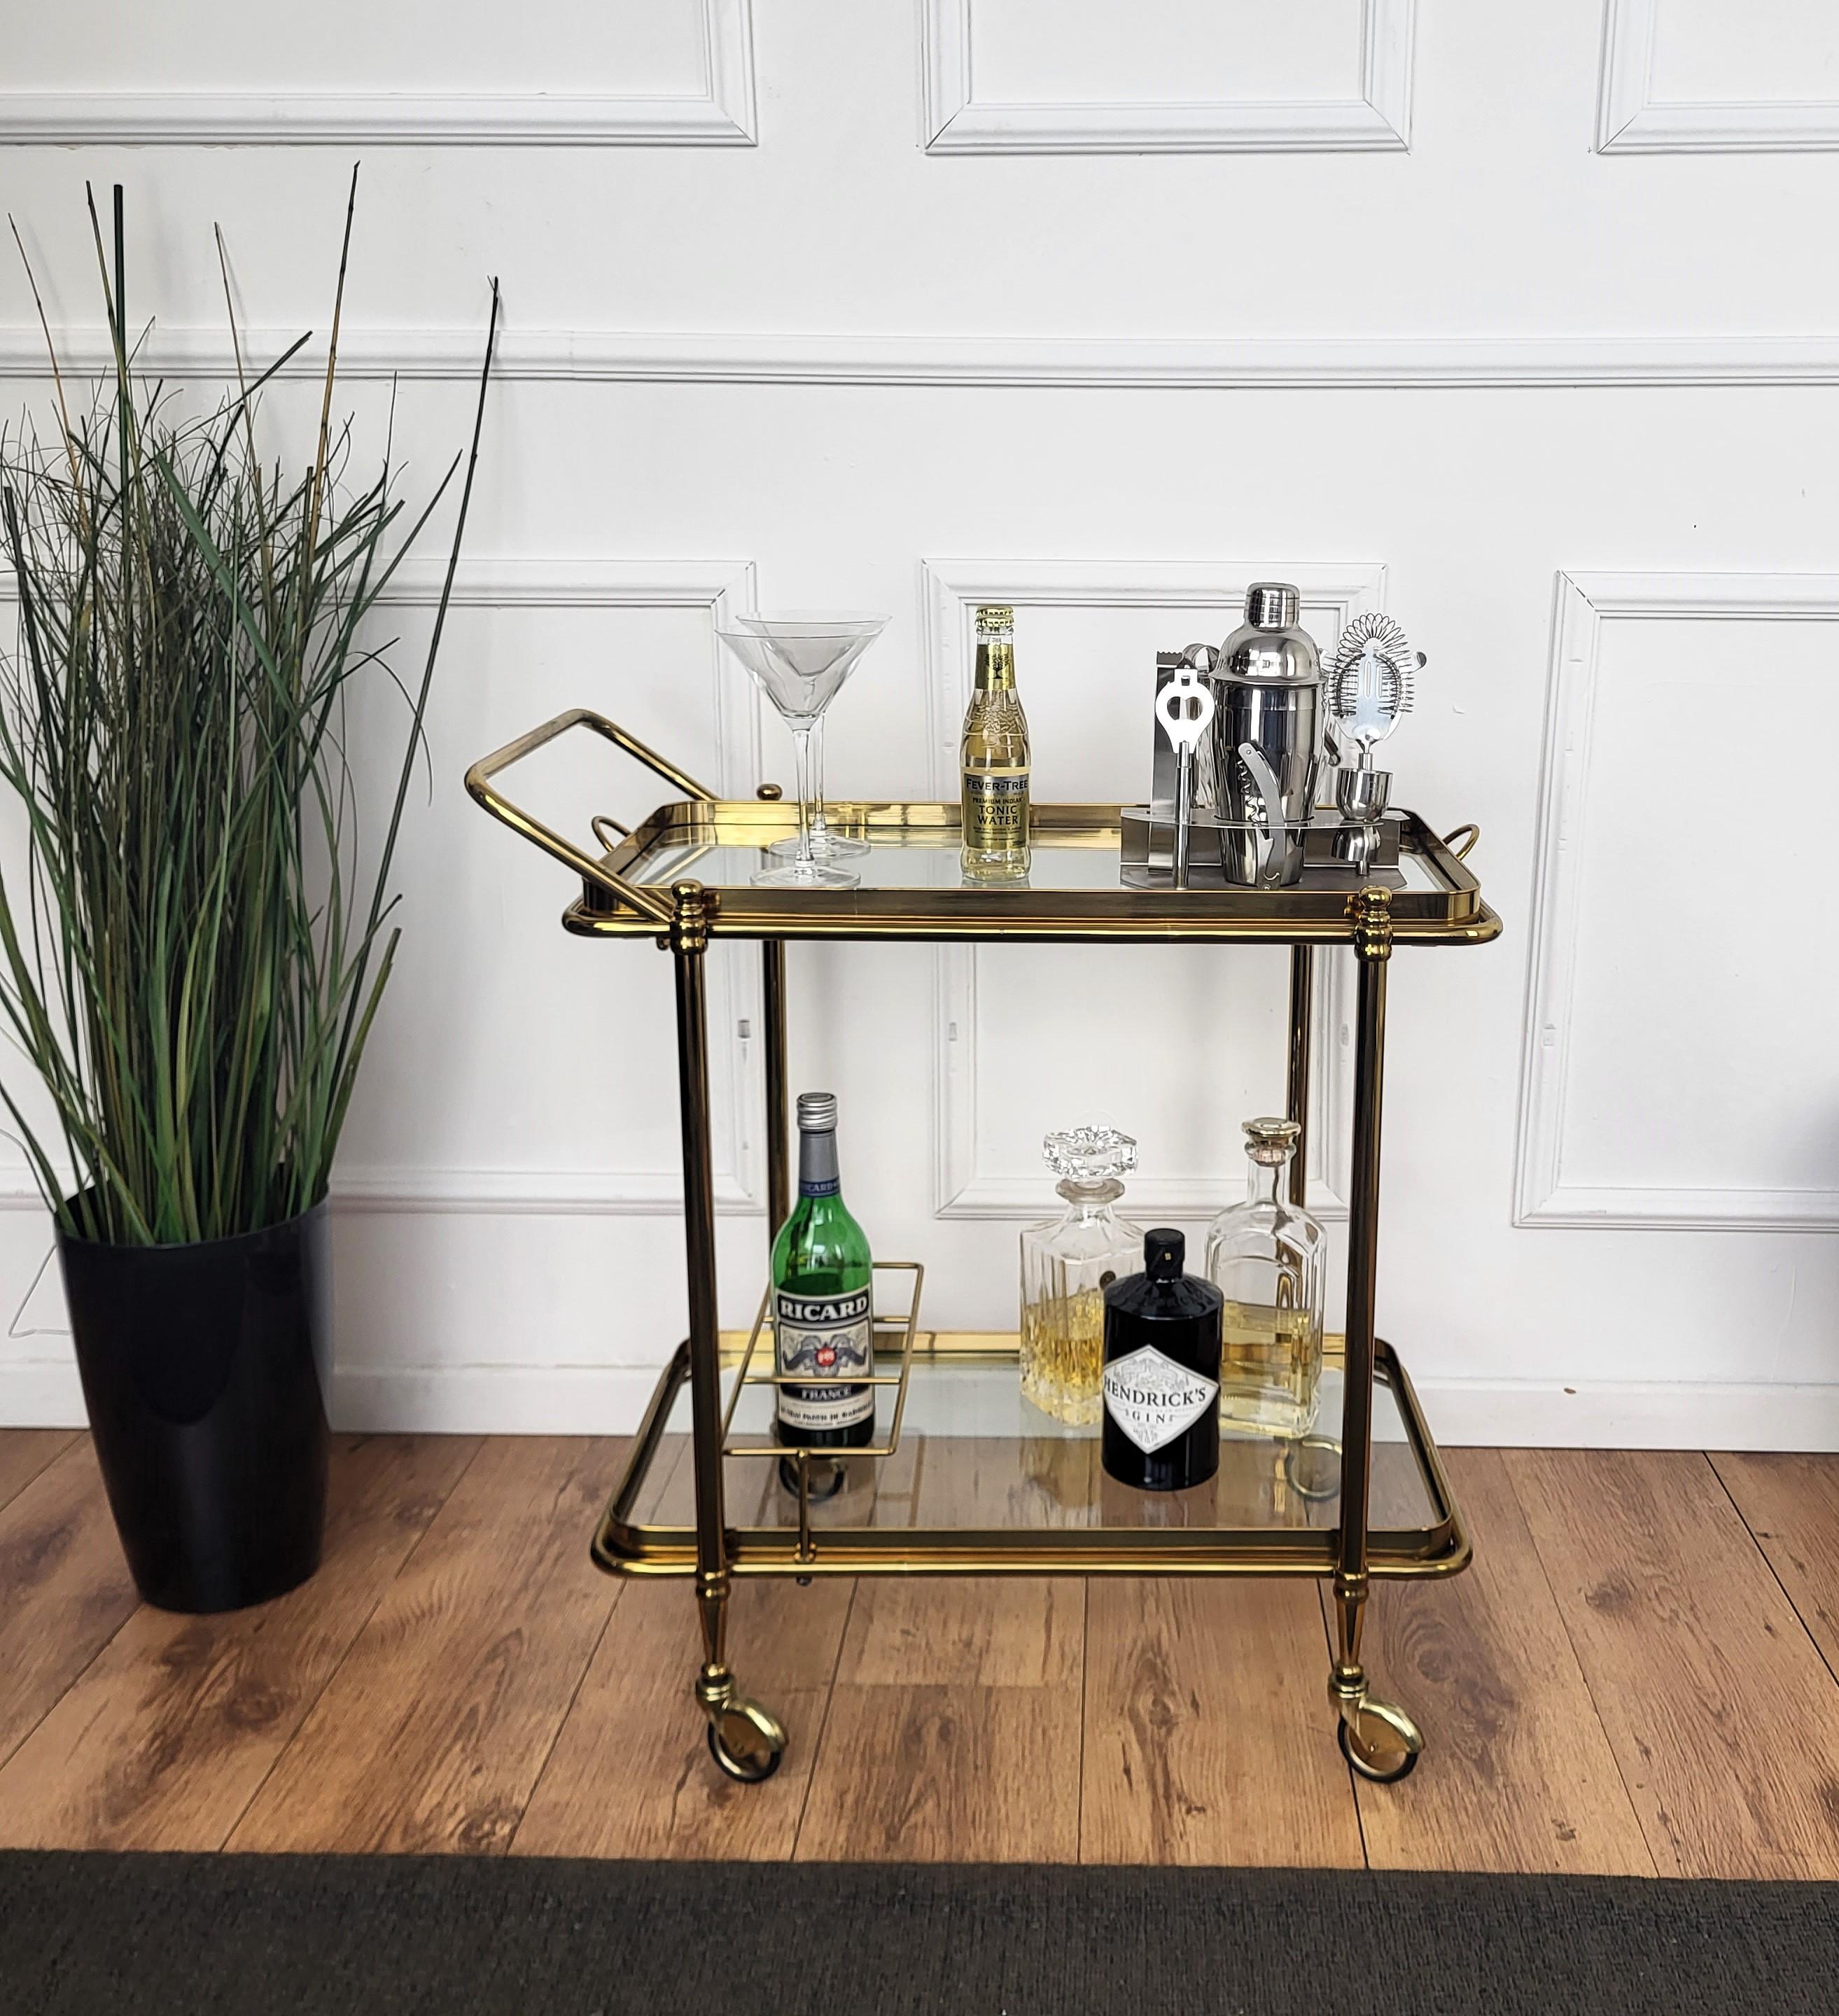 Beautiful and stylish 1960s Hollywood Regency Italian two-tier shiny gilt brass and glass bar cart with removable top tray and squared 3 bottle holder side shelf. Very good condition of both the brass finish and the glass trays.

A great piece that